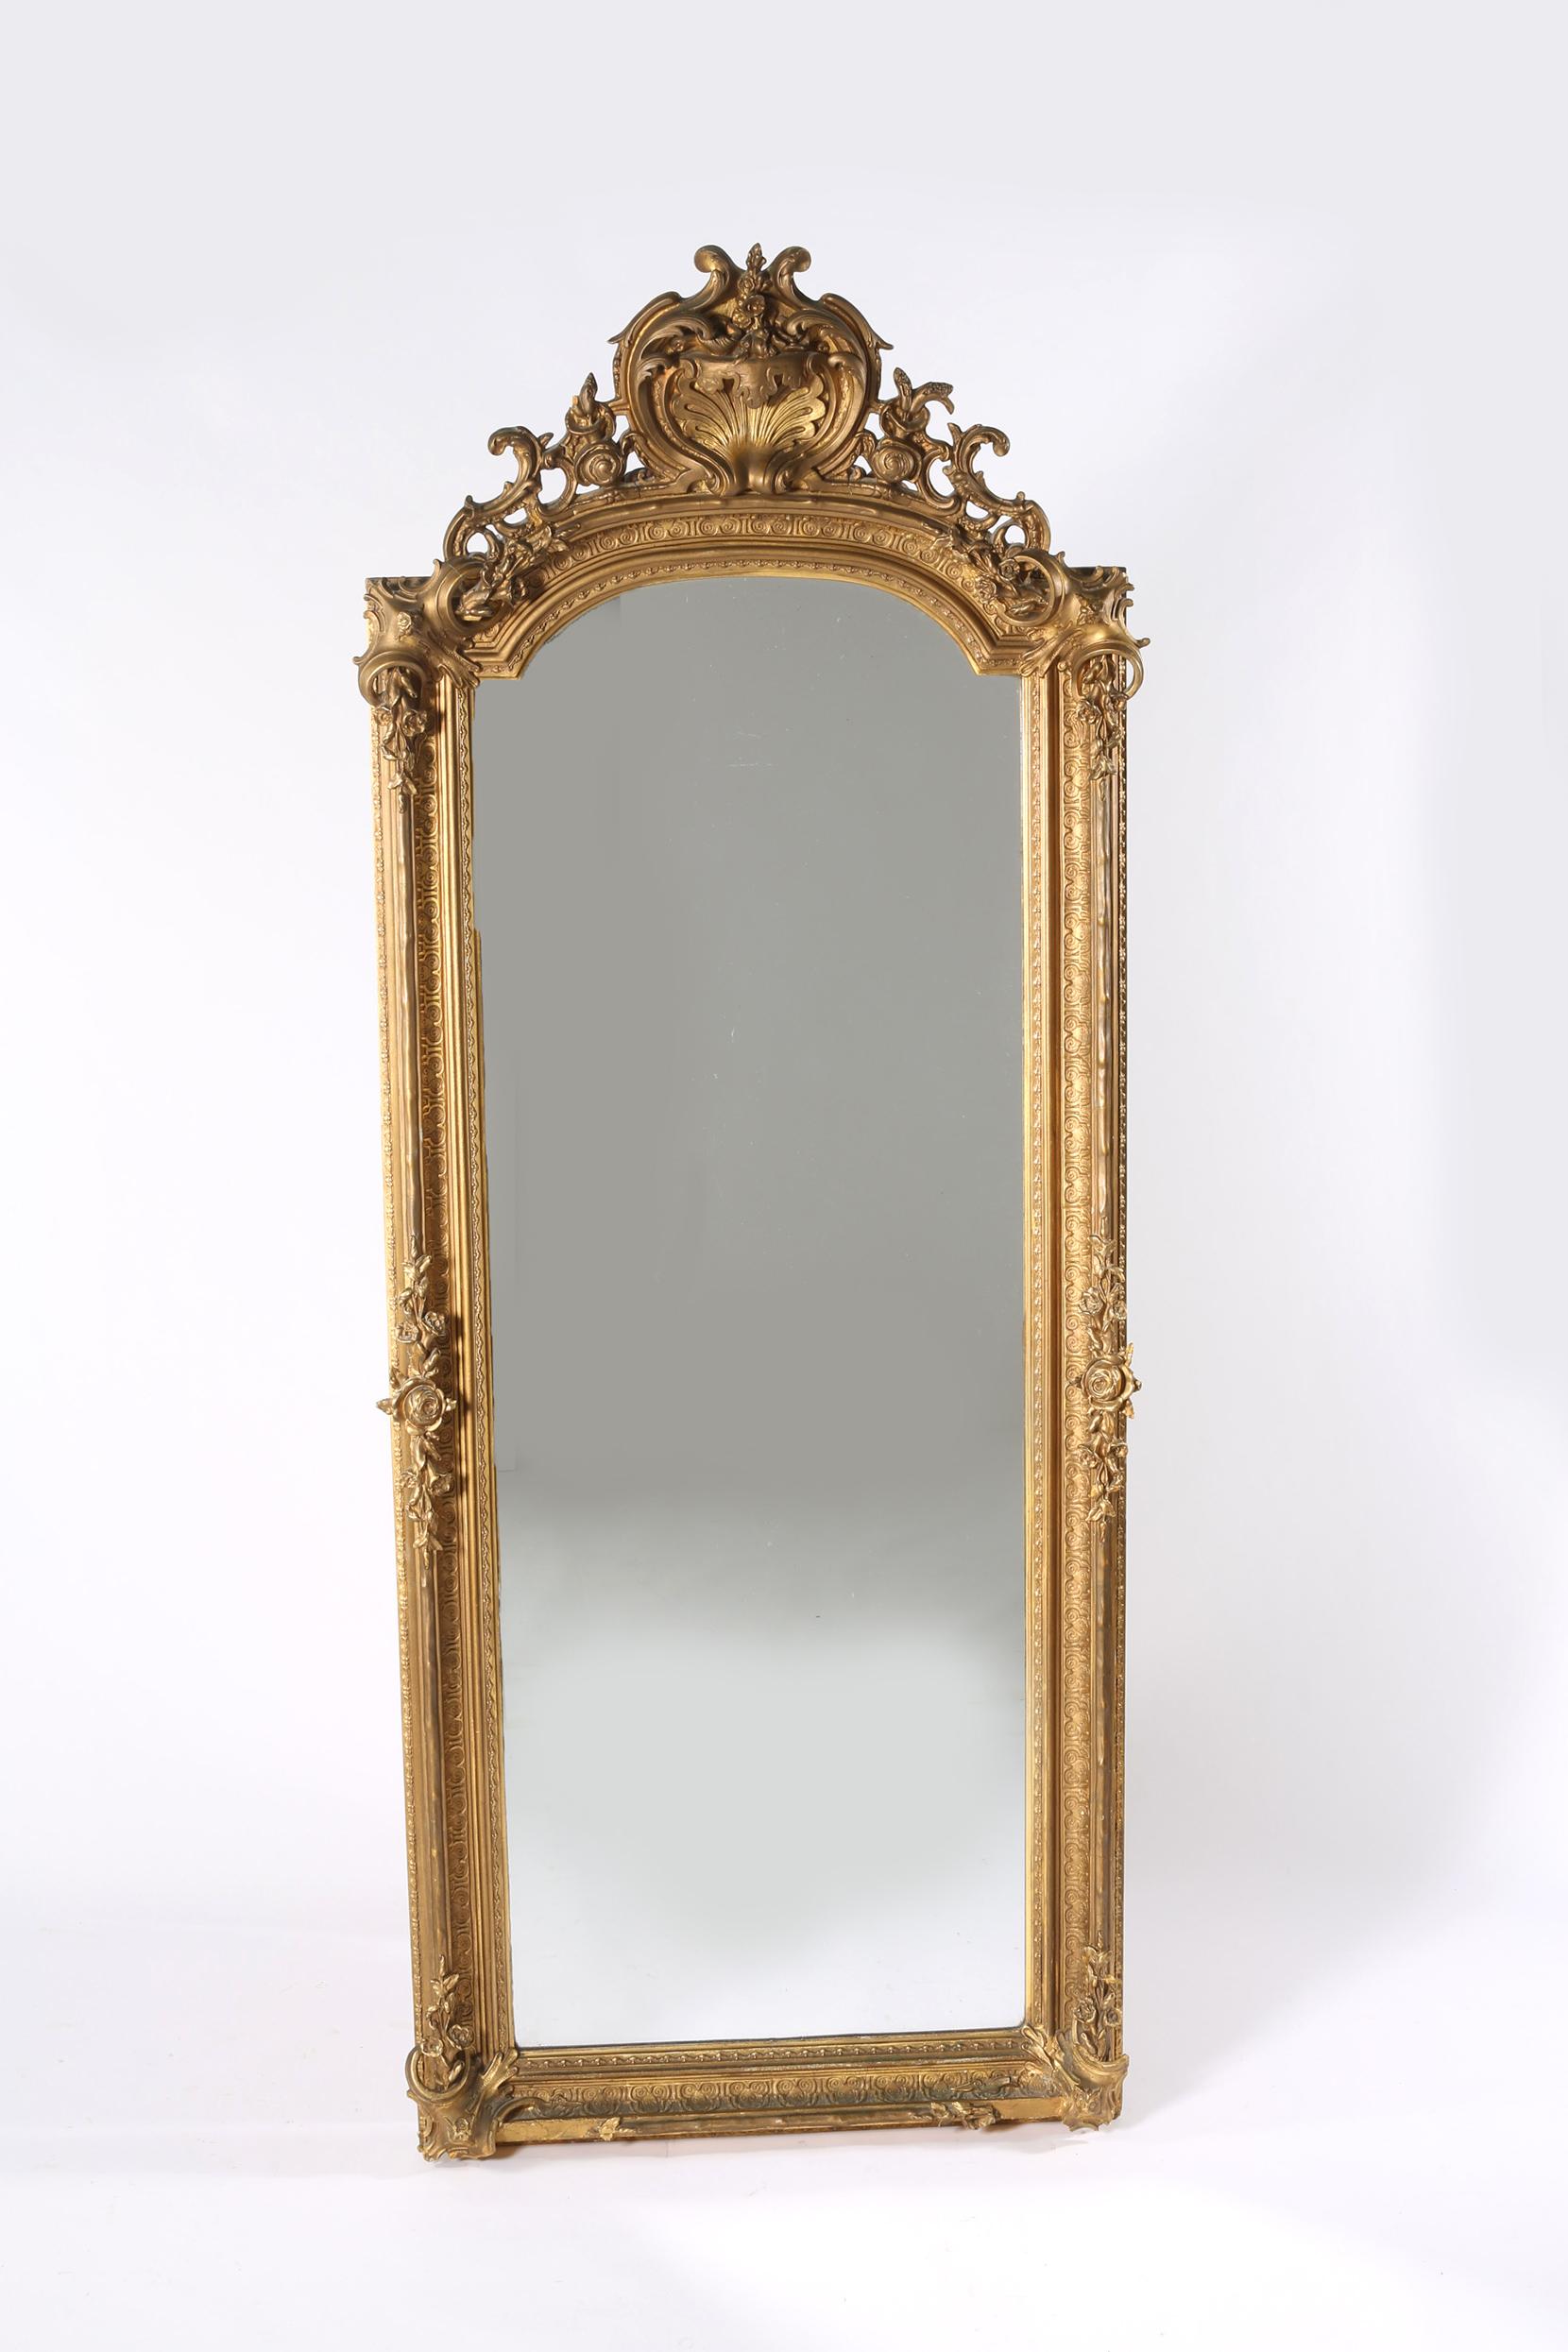 Mid-19th century giltwood framed beveled hanging wall mirror with arch top design details. The mirror is in good antique condition with wear appropriate to age / use. The mirror stand about 77 inches high x 32 inches wide.